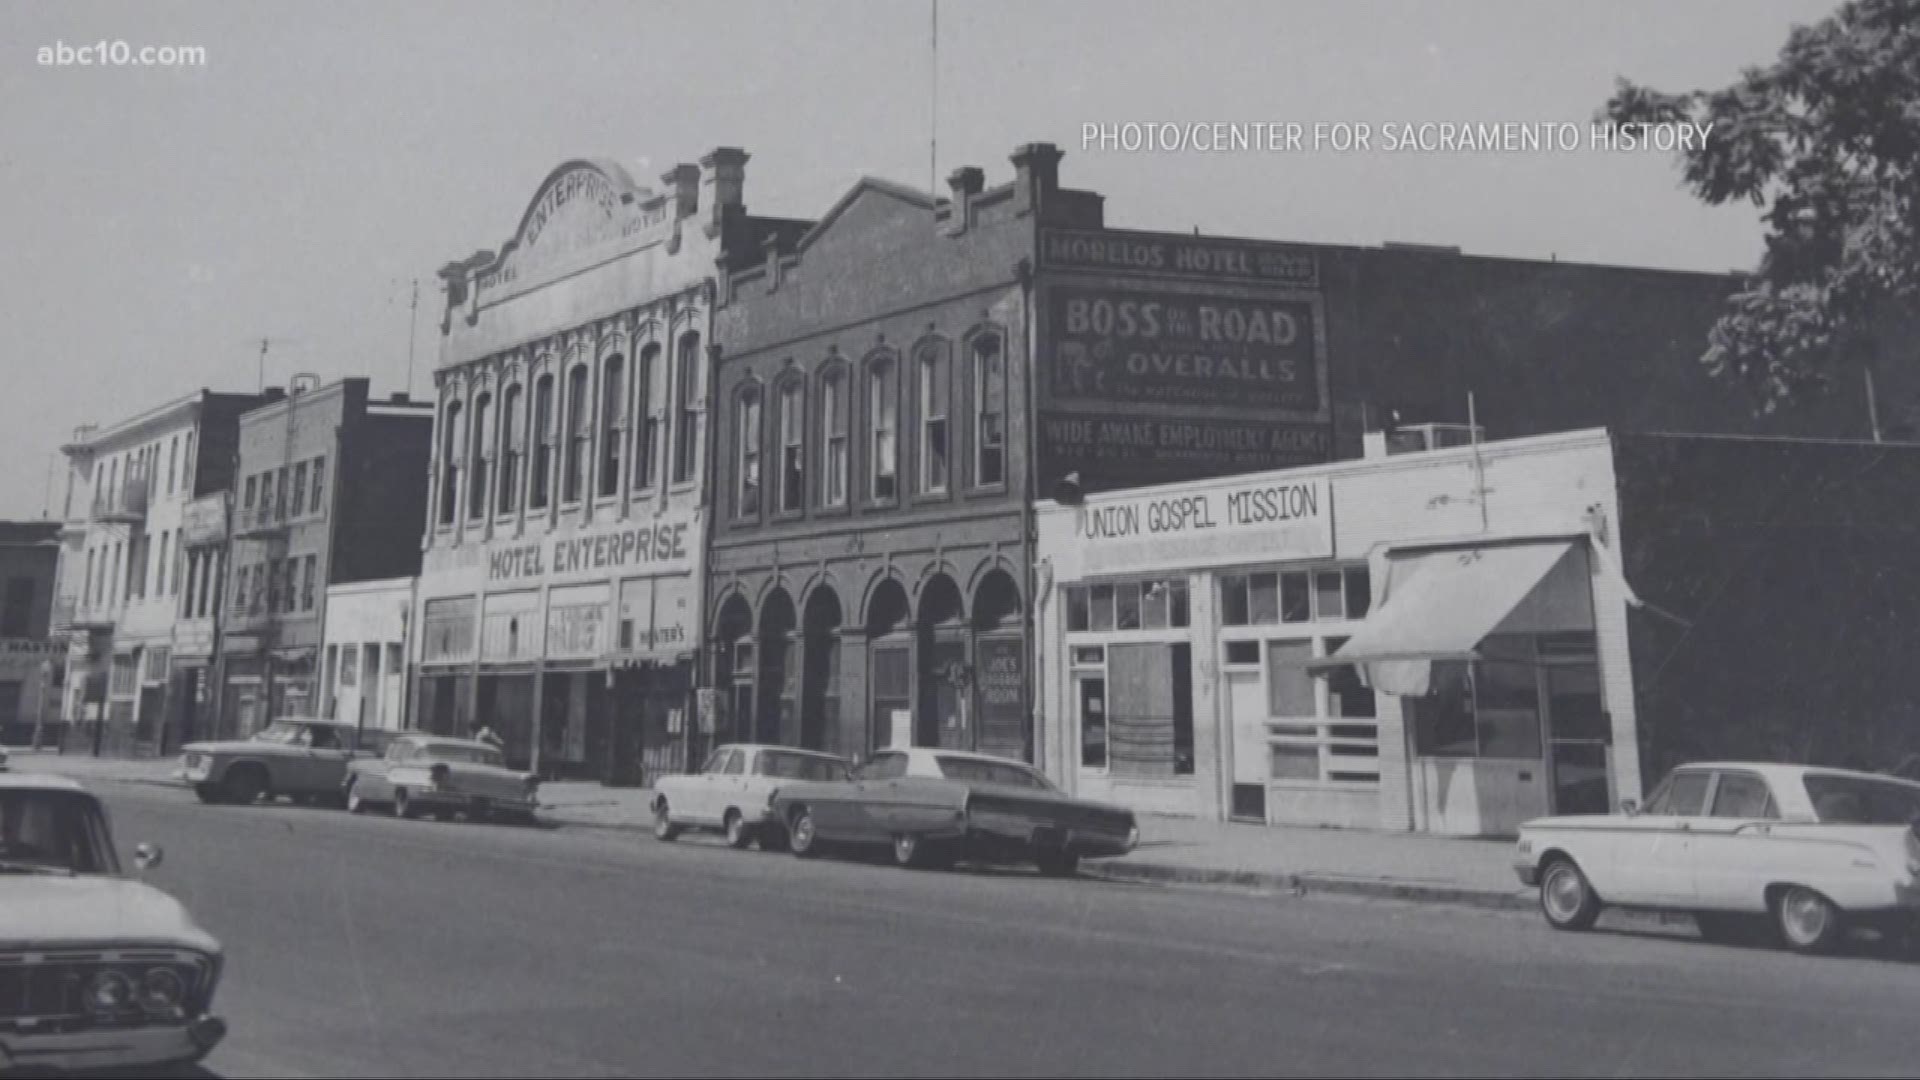 A Boss of the Road advertisement, which dated back to the 1920s, was recently removed from a historic downtown building, according to the Center for Sacramento History.